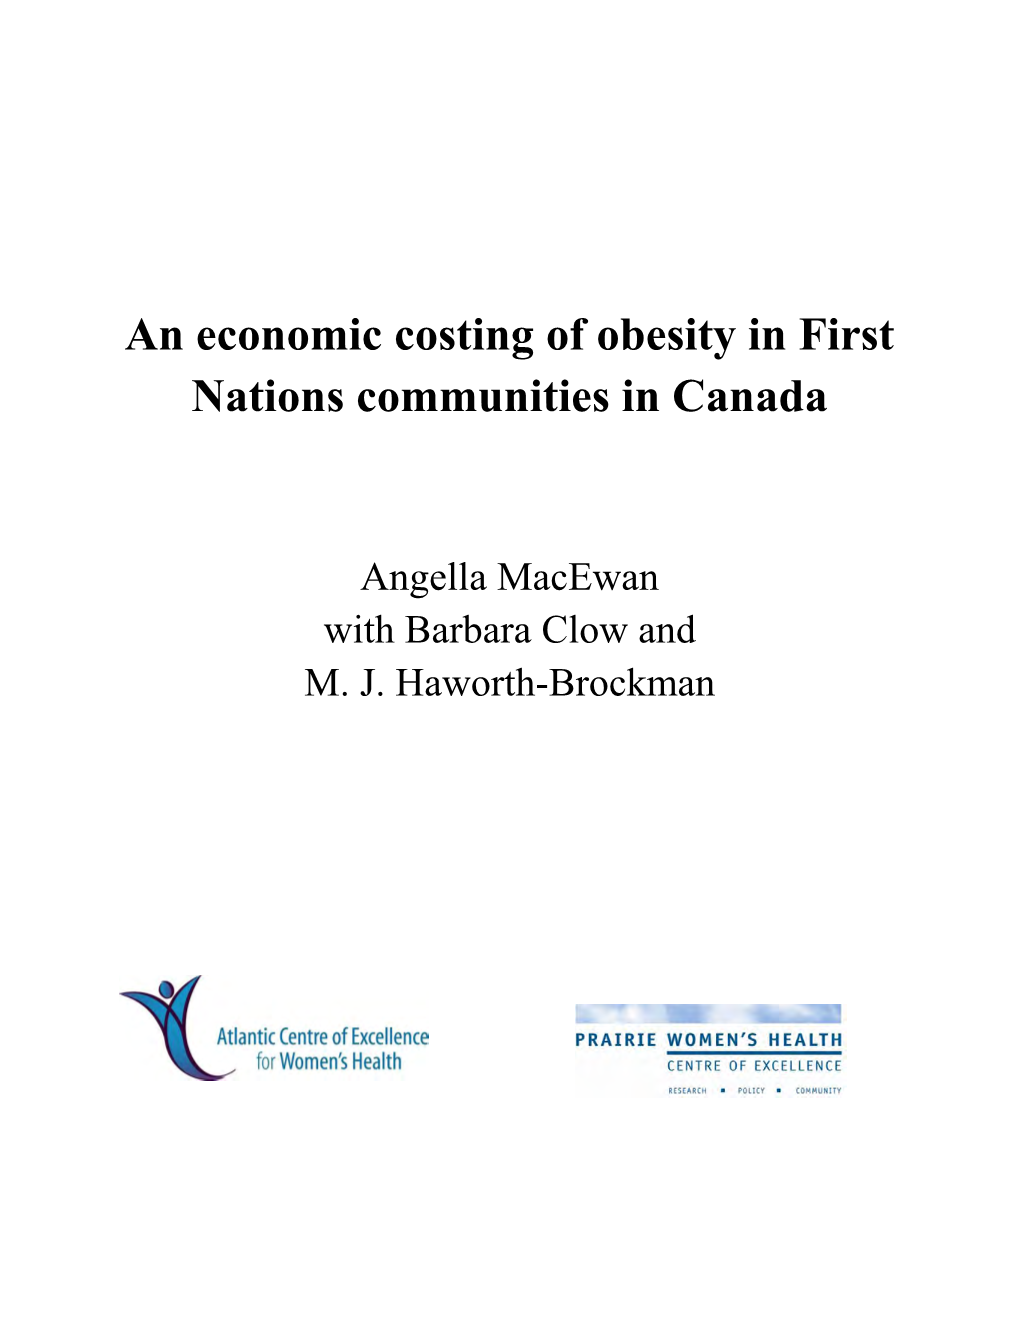 An Economic Costing of Obesity in First Nations Communities in Canada